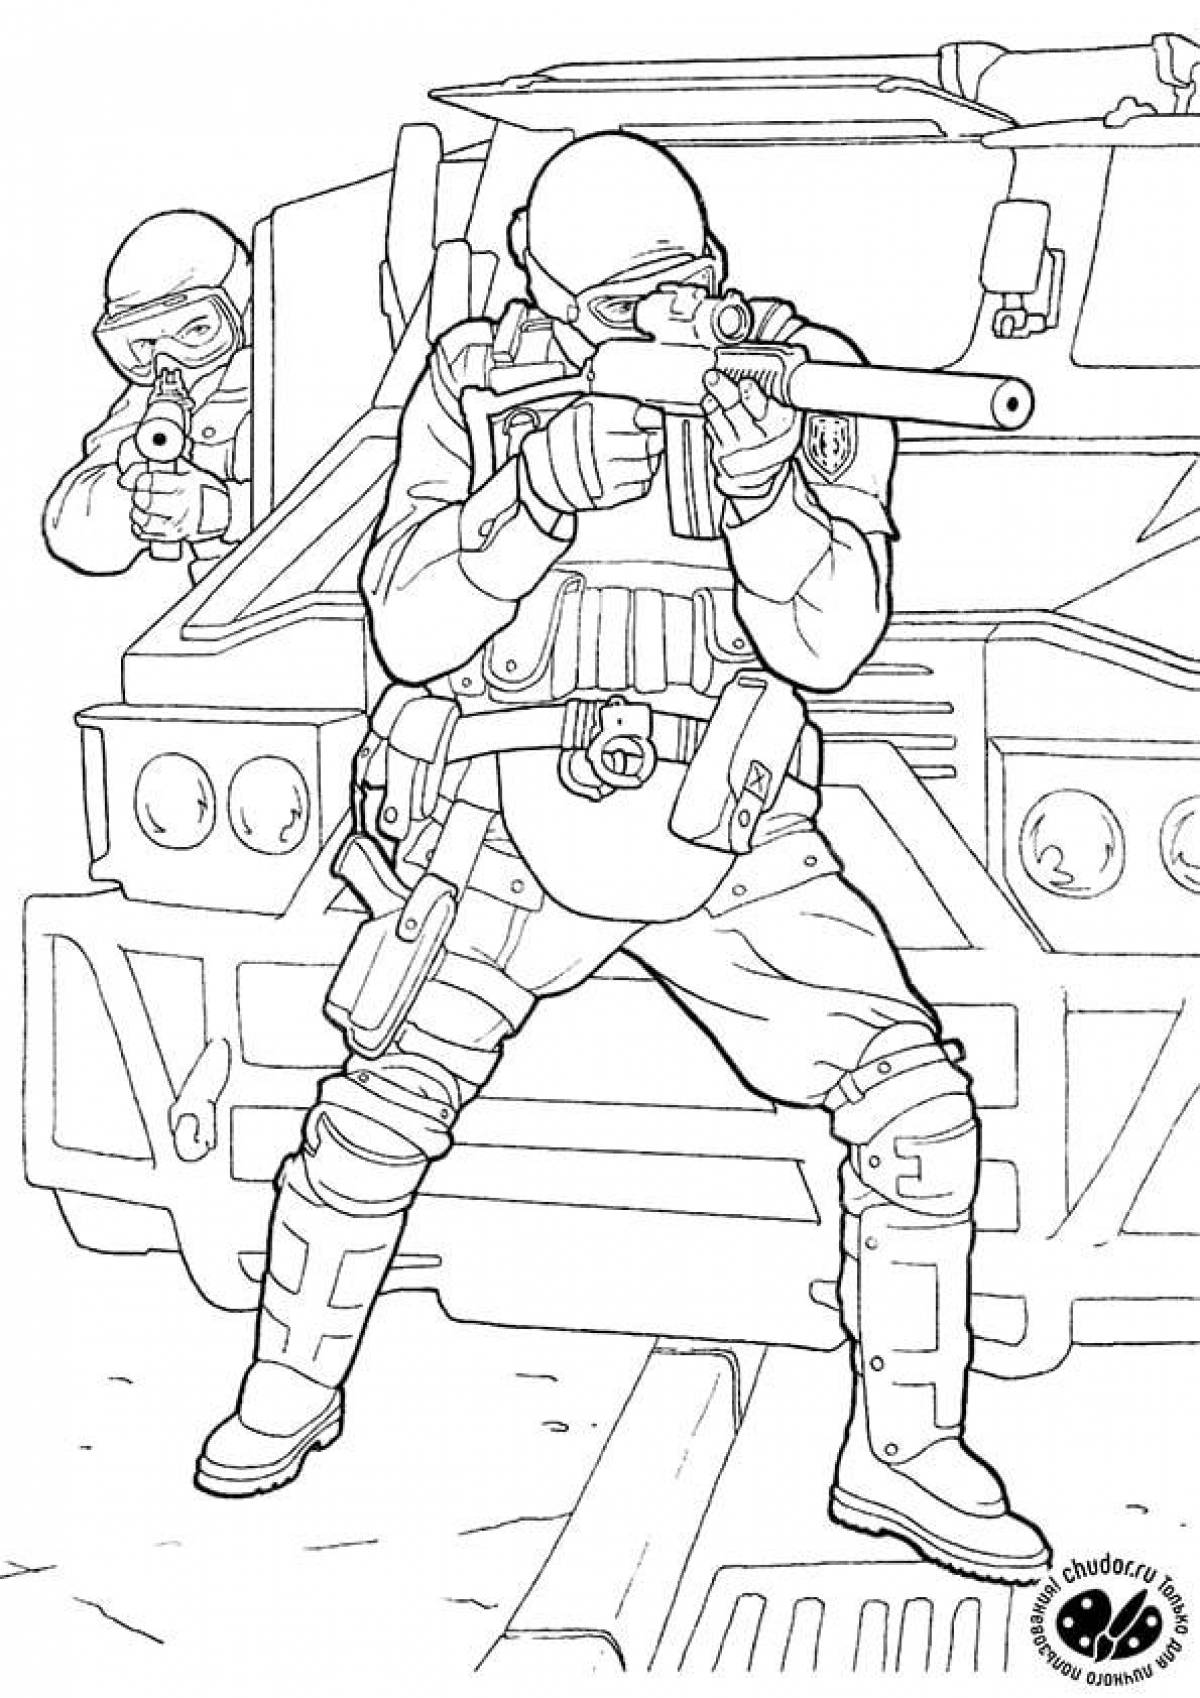 Coloring generously special forces